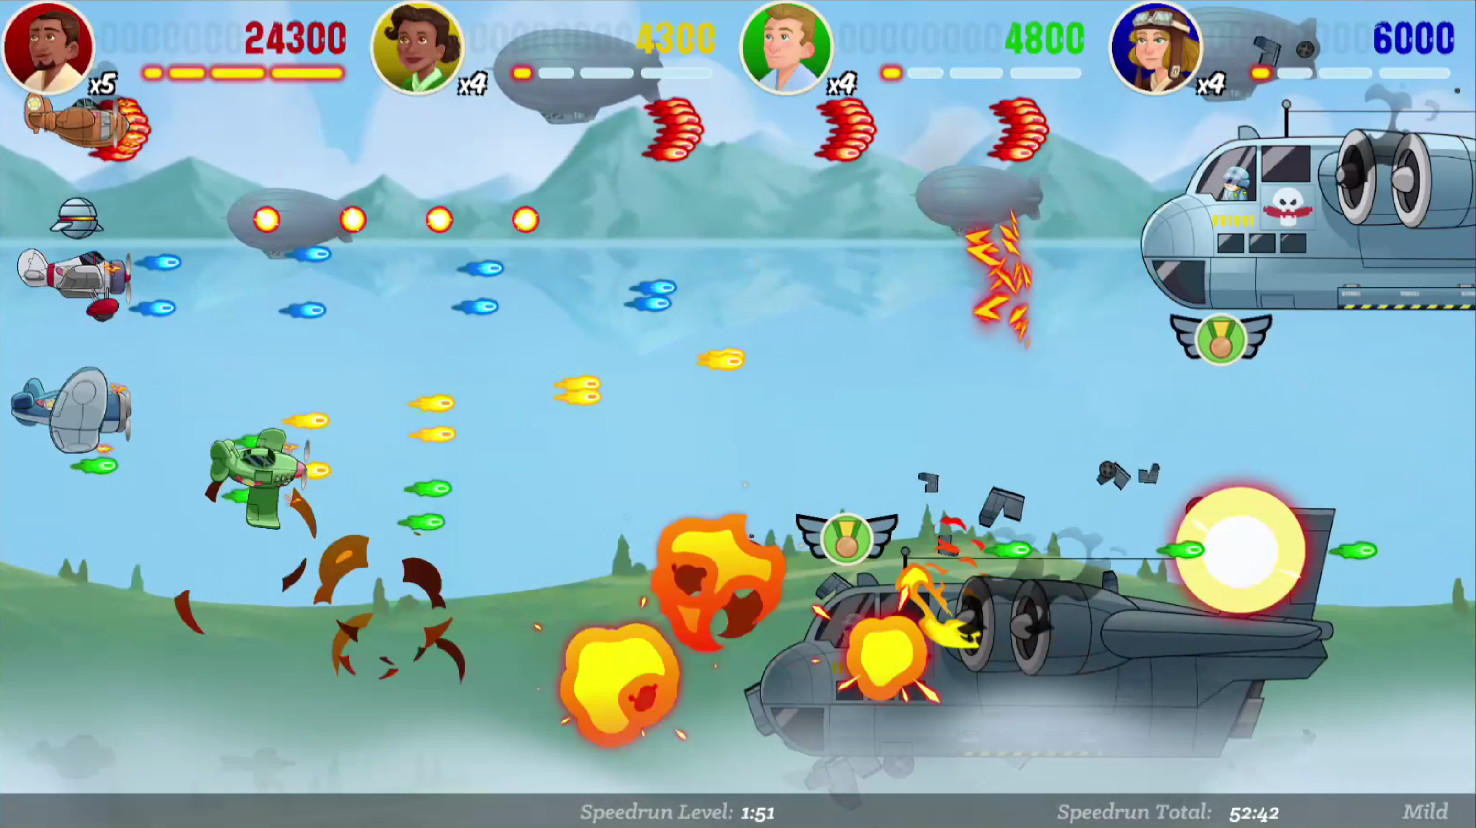 Dogfight: A Sausage Bomber Story Steam CD Key, $2.23